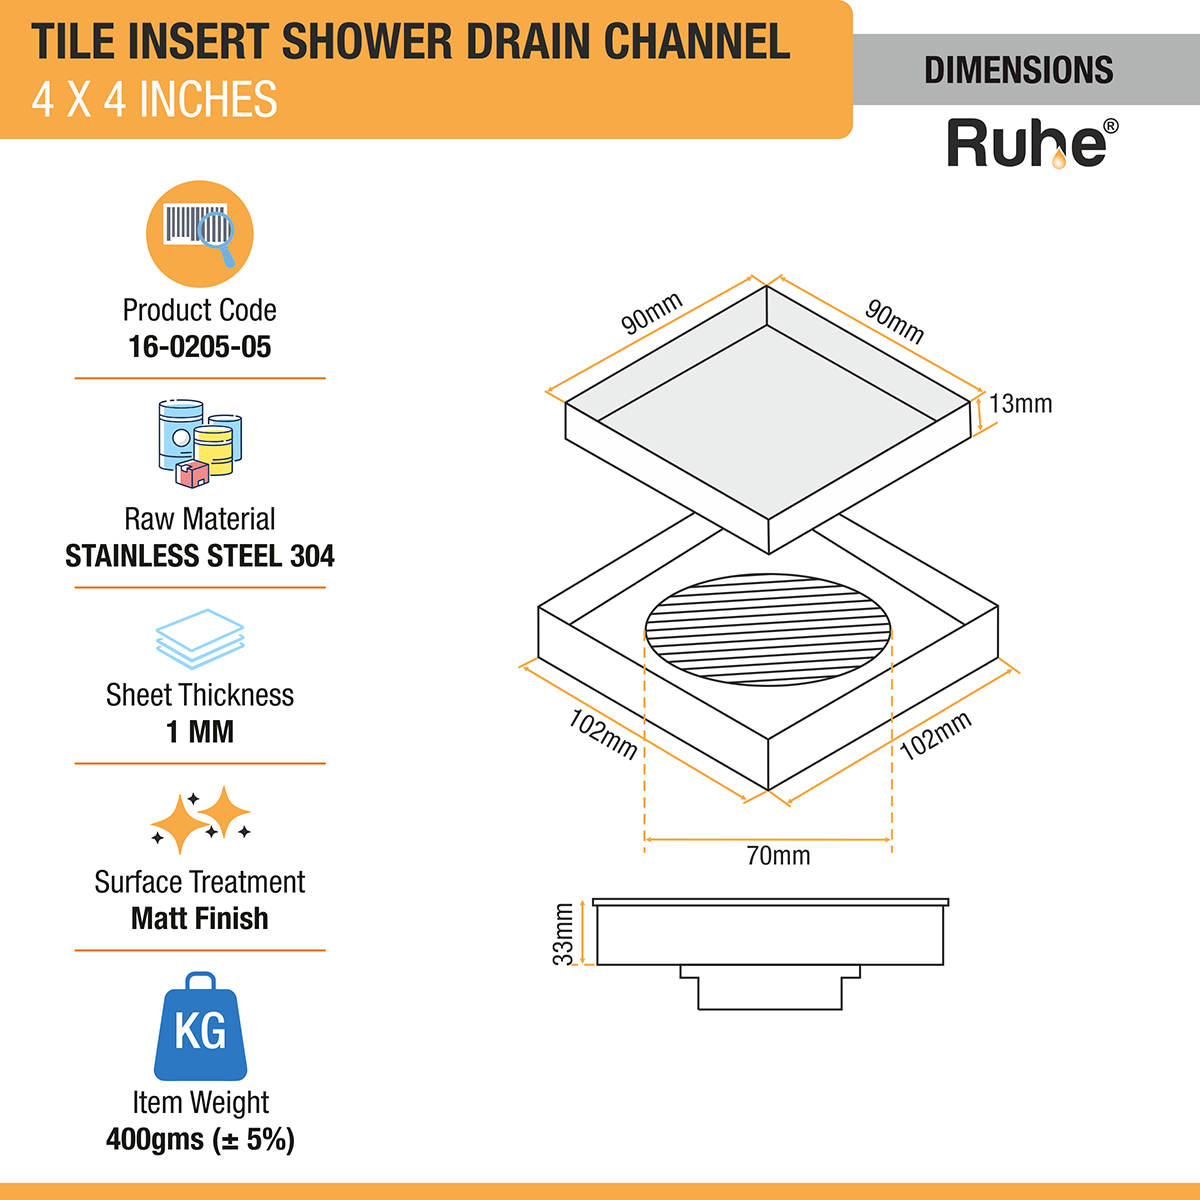 Tile Insert Shower Drain Channel (4 x 4 Inches) with Cockroach Trap (304 Grade) dimensions and sizes